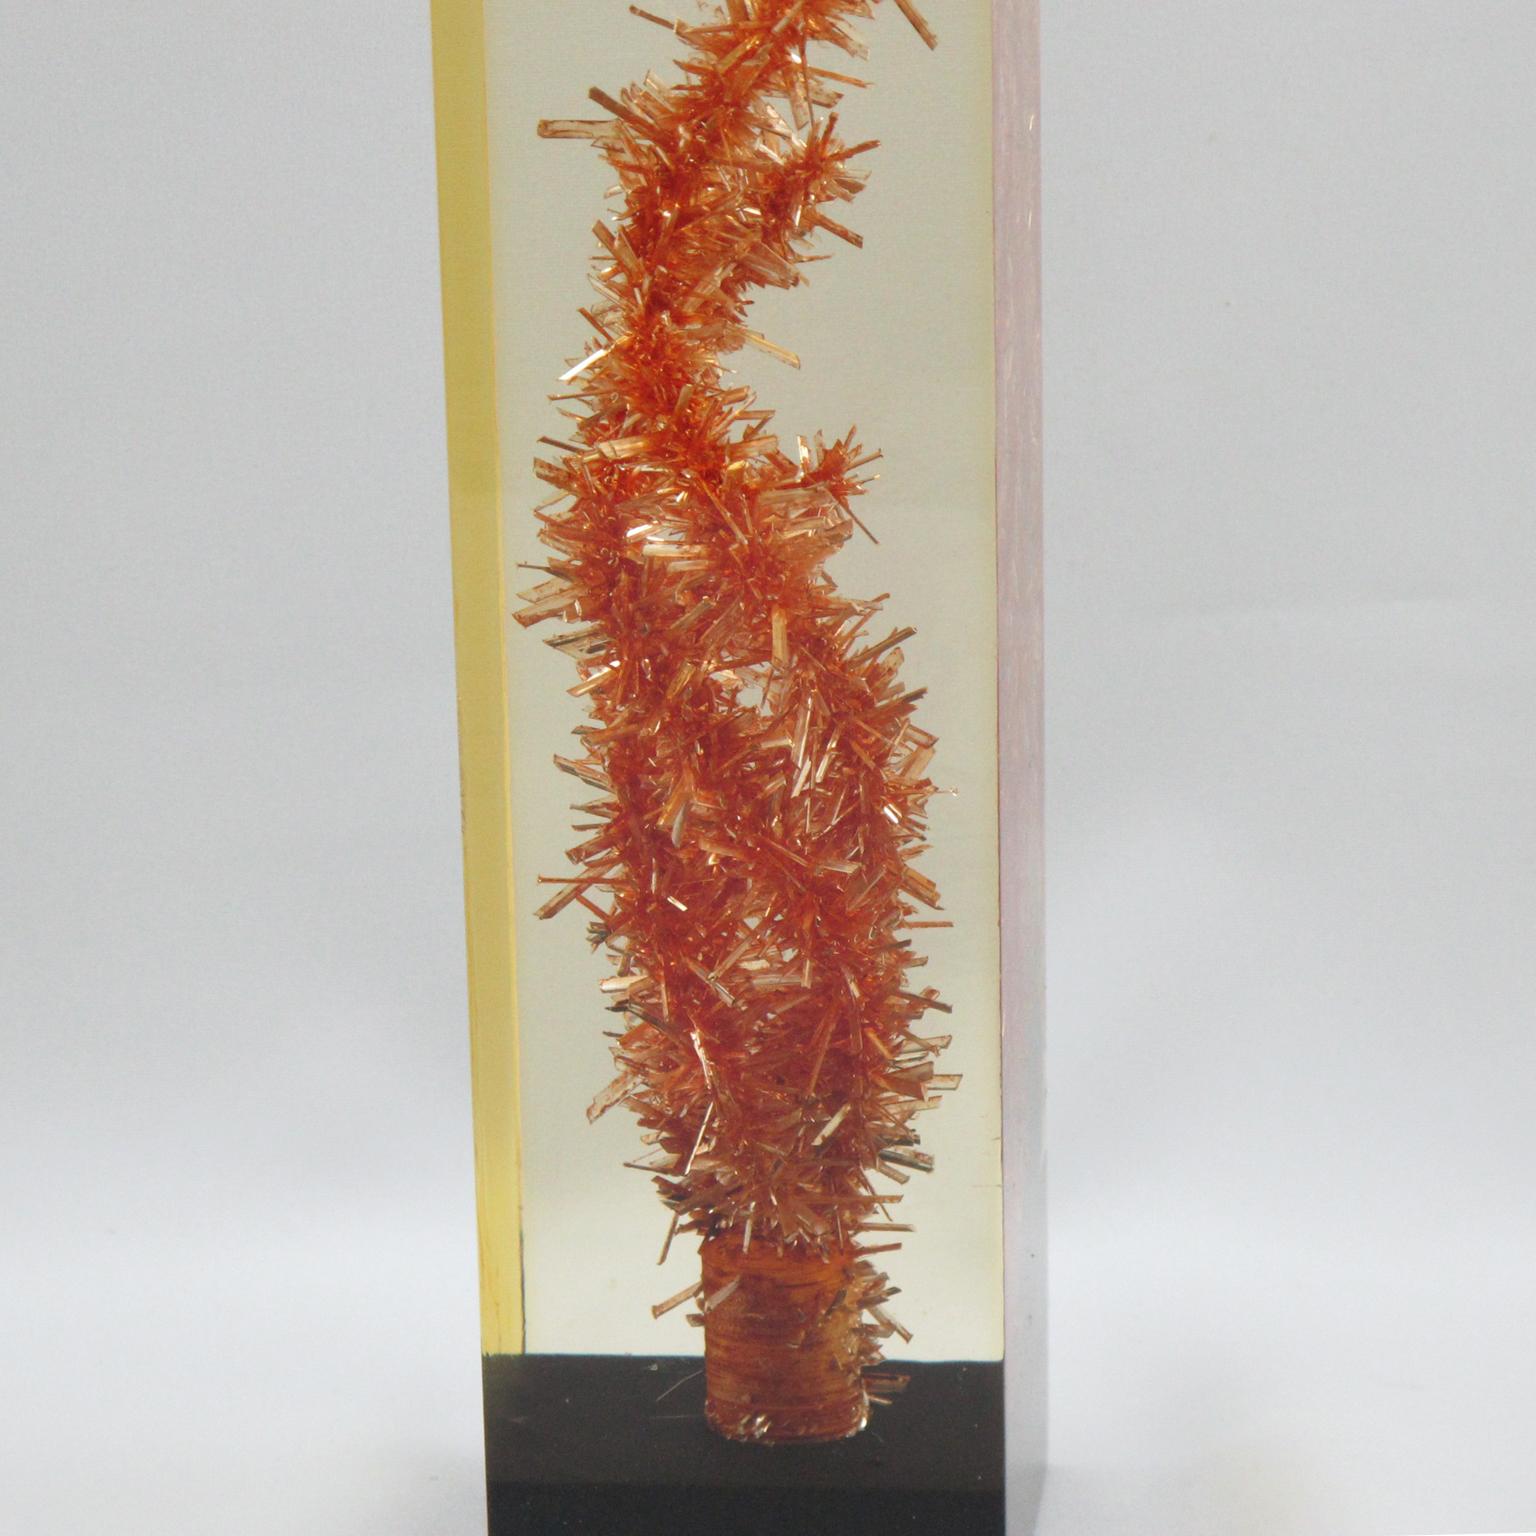 This unique Pierre Giraudon Resin table lamp with inclusions is a stunning statement piece. Crafted in the 1960s, the piece features a layered poured resin with orange coral-like inclusions and a black resin base. The natural yellowish coloration of